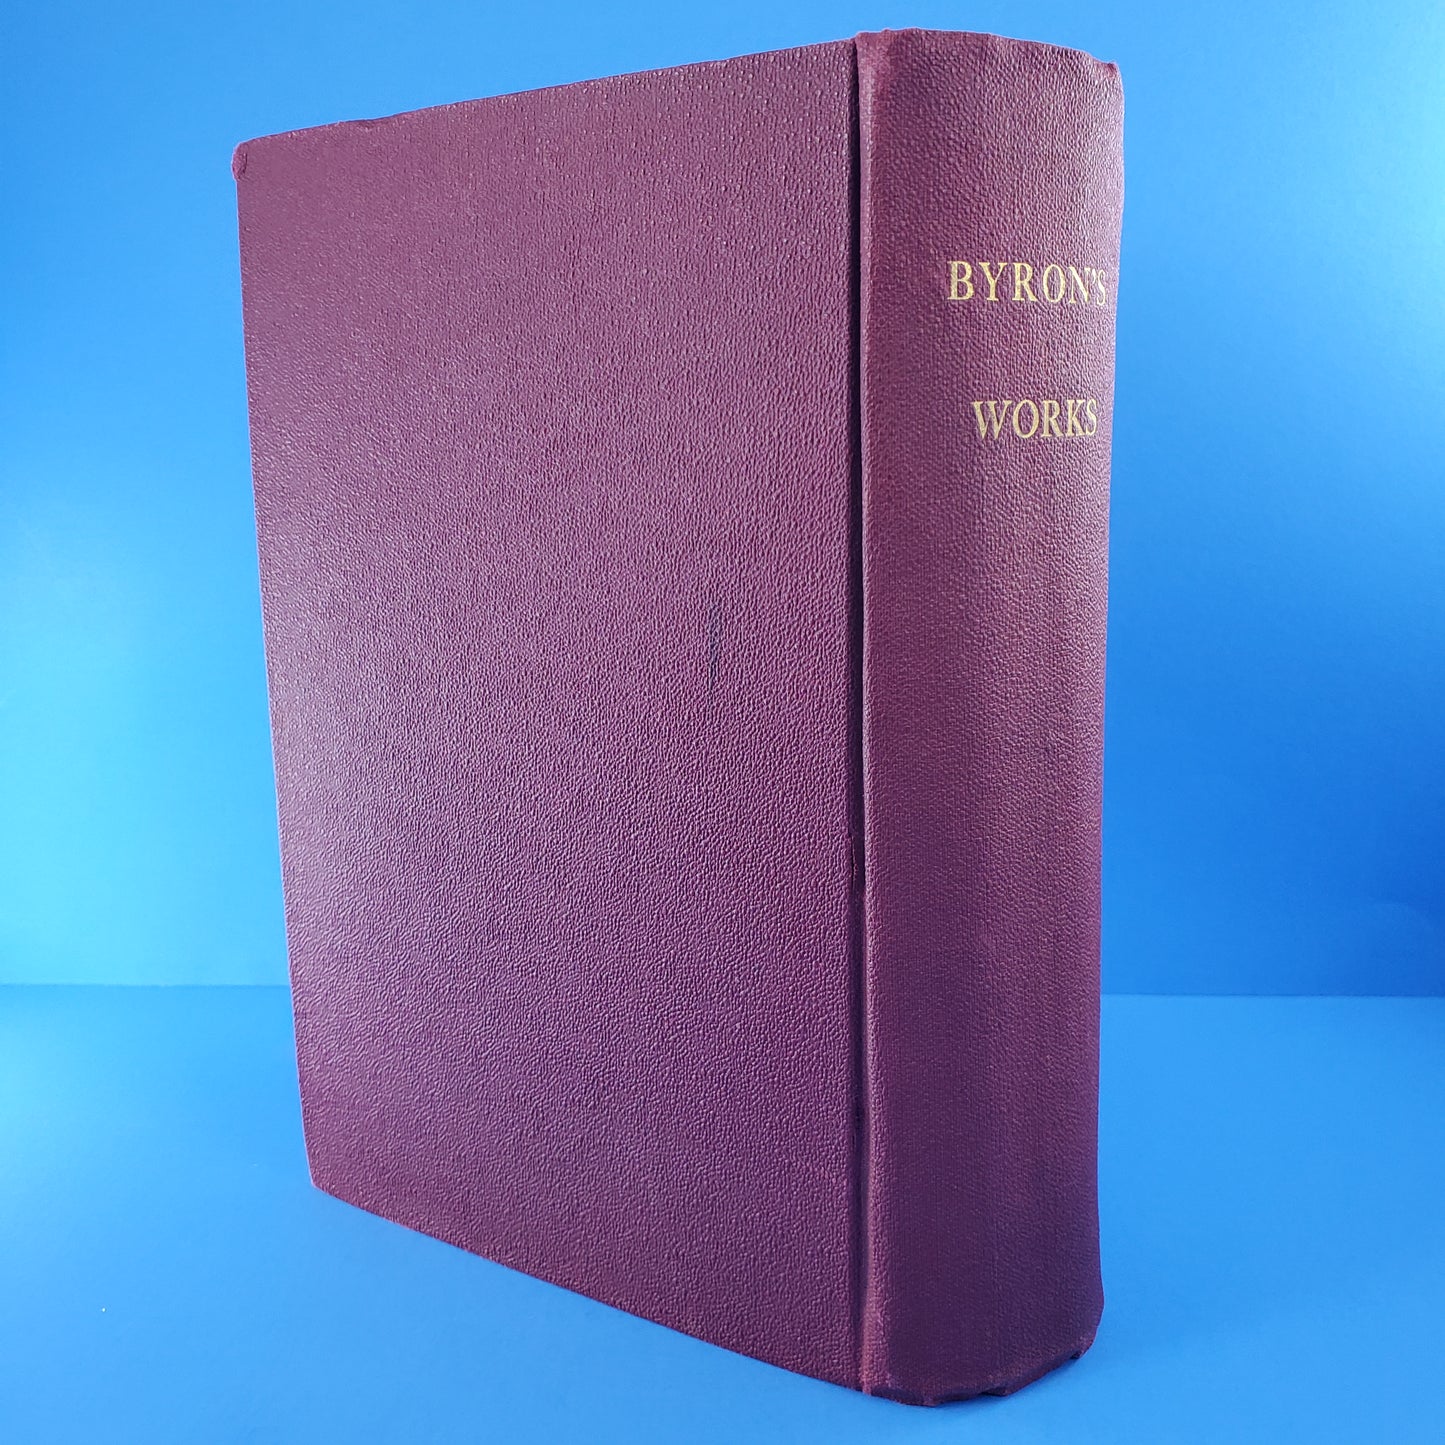 The Poetical Works of Lord Byron: Complete in One Volume